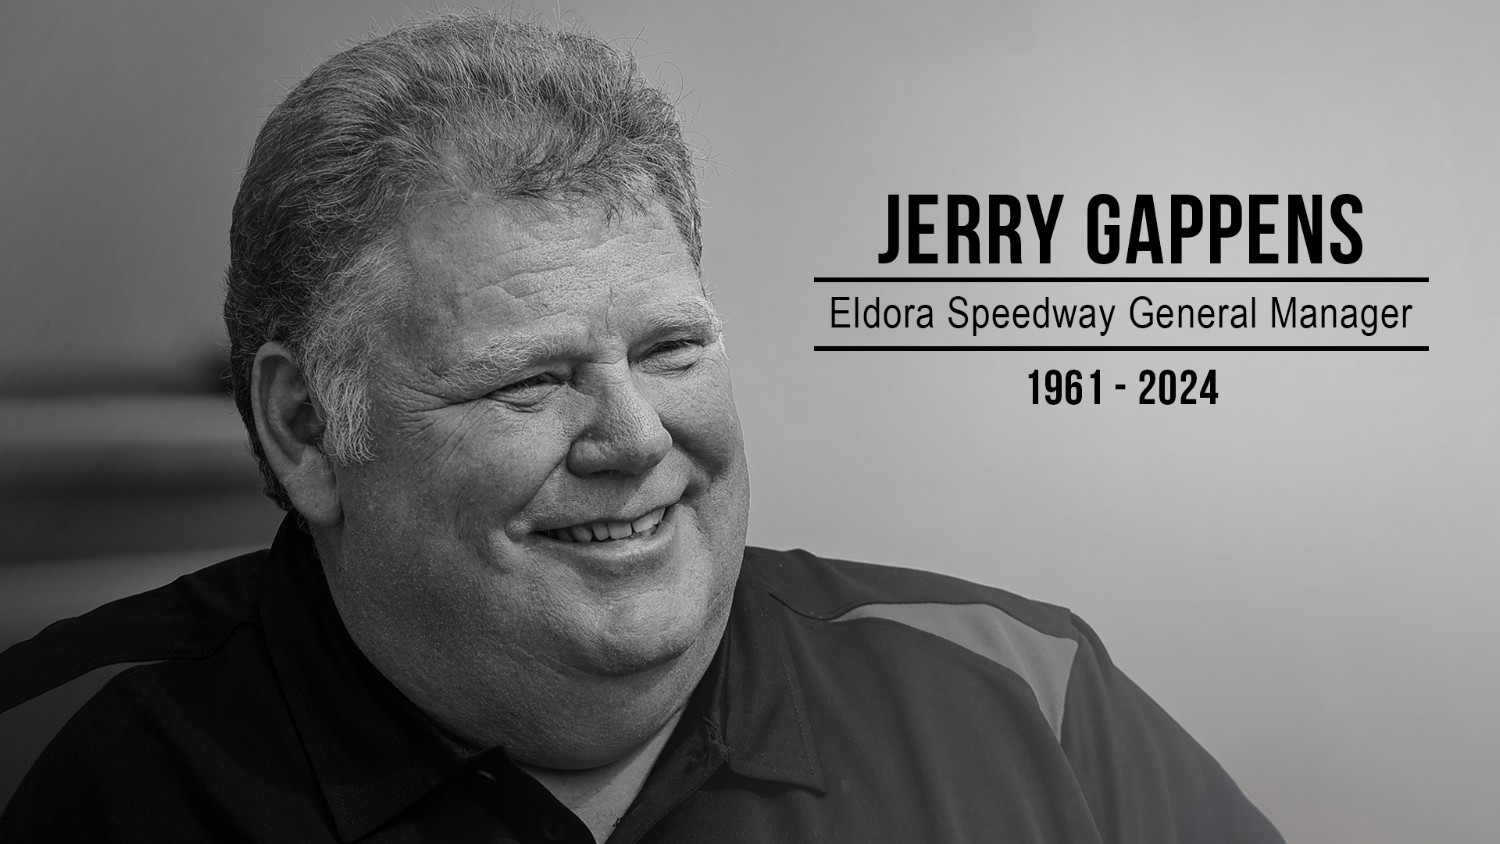 Jerry Gappens dead at 63. One too many Covid shots